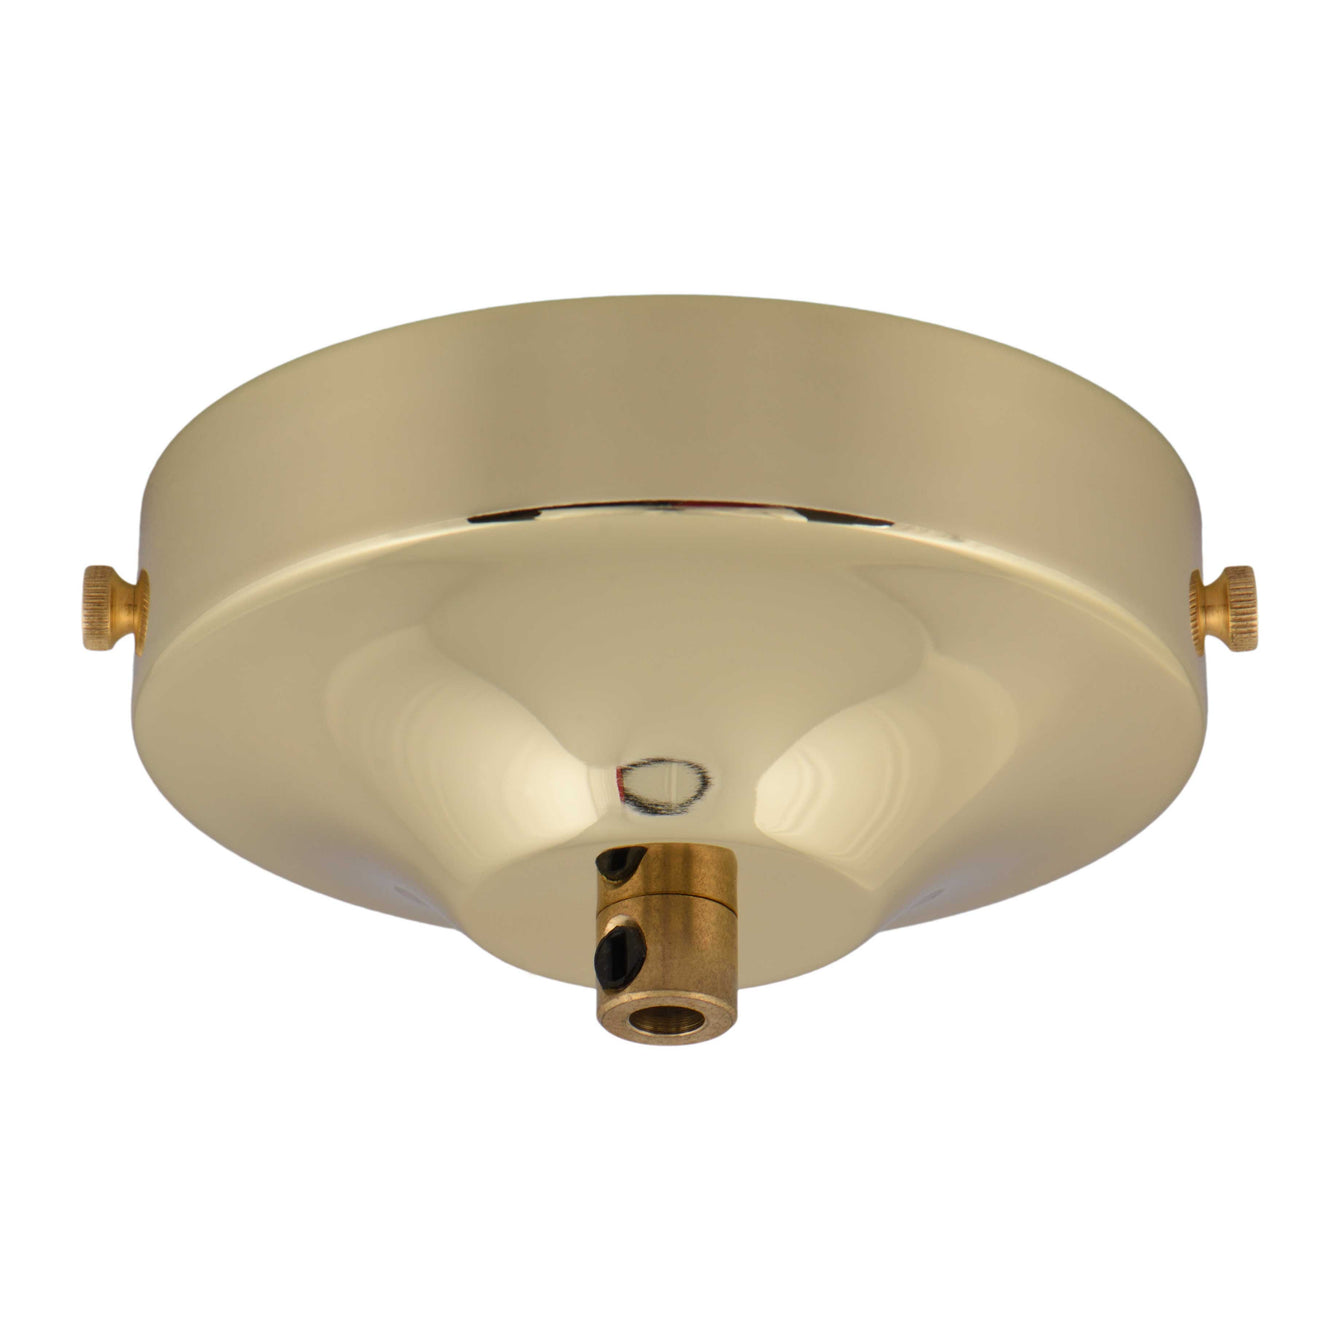 ElekTek 100mm Diameter Convex Ceiling Rose with Strap Bracket and Cord Grip Metallic Finishes Powder Coated Colours - Buy It Better Antique Brass